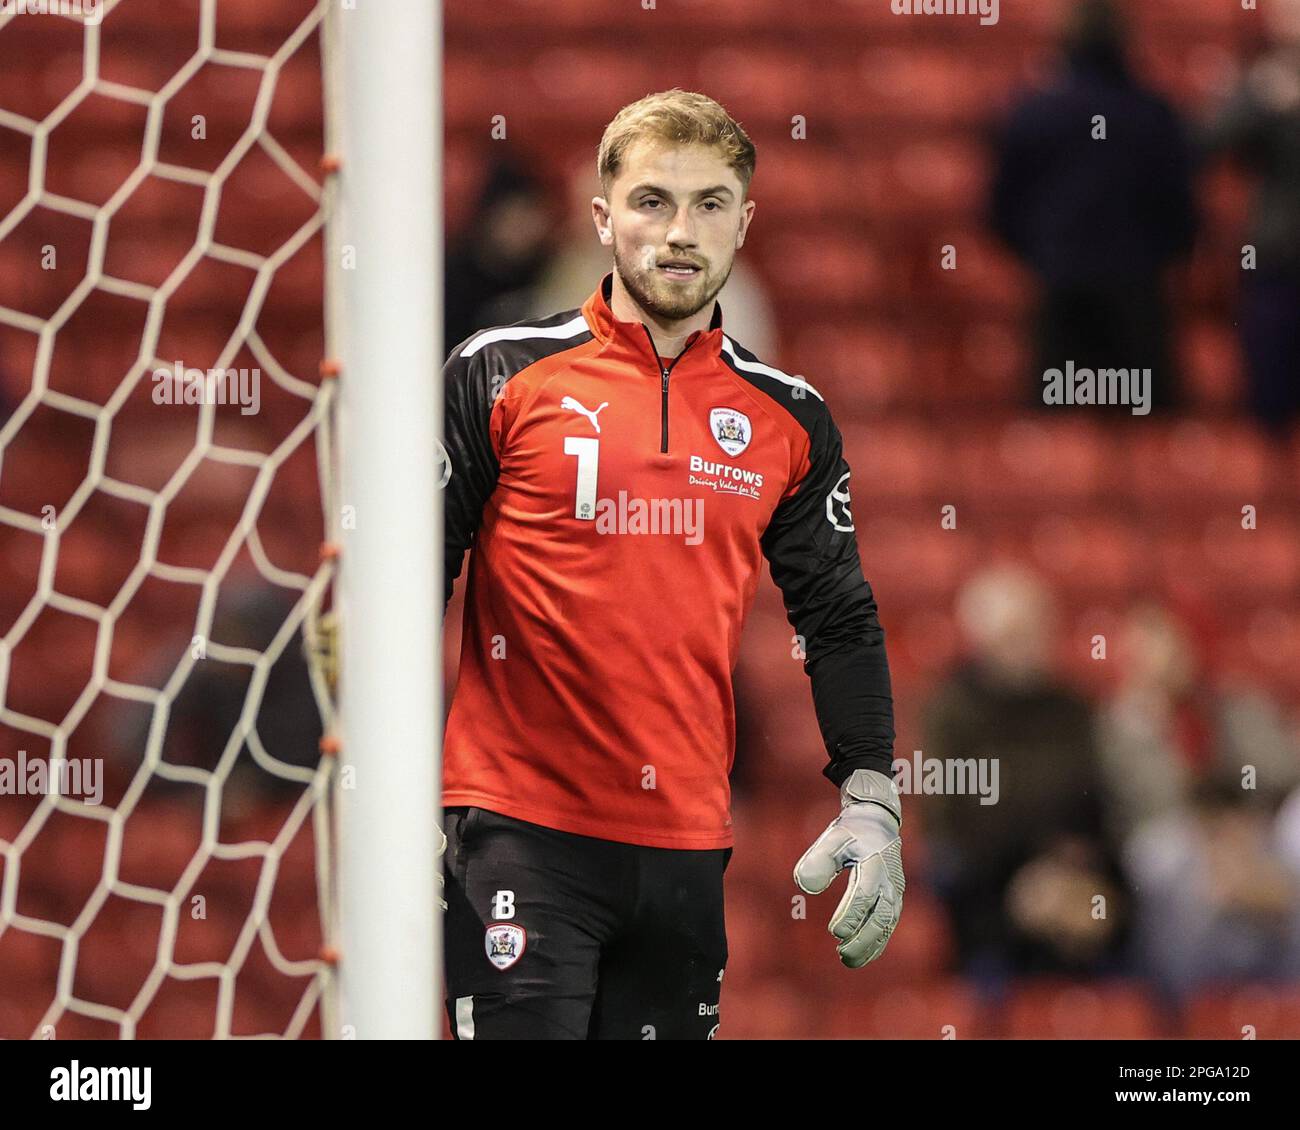 Harvey Isted #1 of Barnsley in the pregame warmup session during the Sky Bet League 1 match Barnsley vs Sheffield Wednesday at Oakwell, Barnsley, United Kingdom, 21st March 2023  (Photo by Mark Cosgrove/News Images) Stock Photo